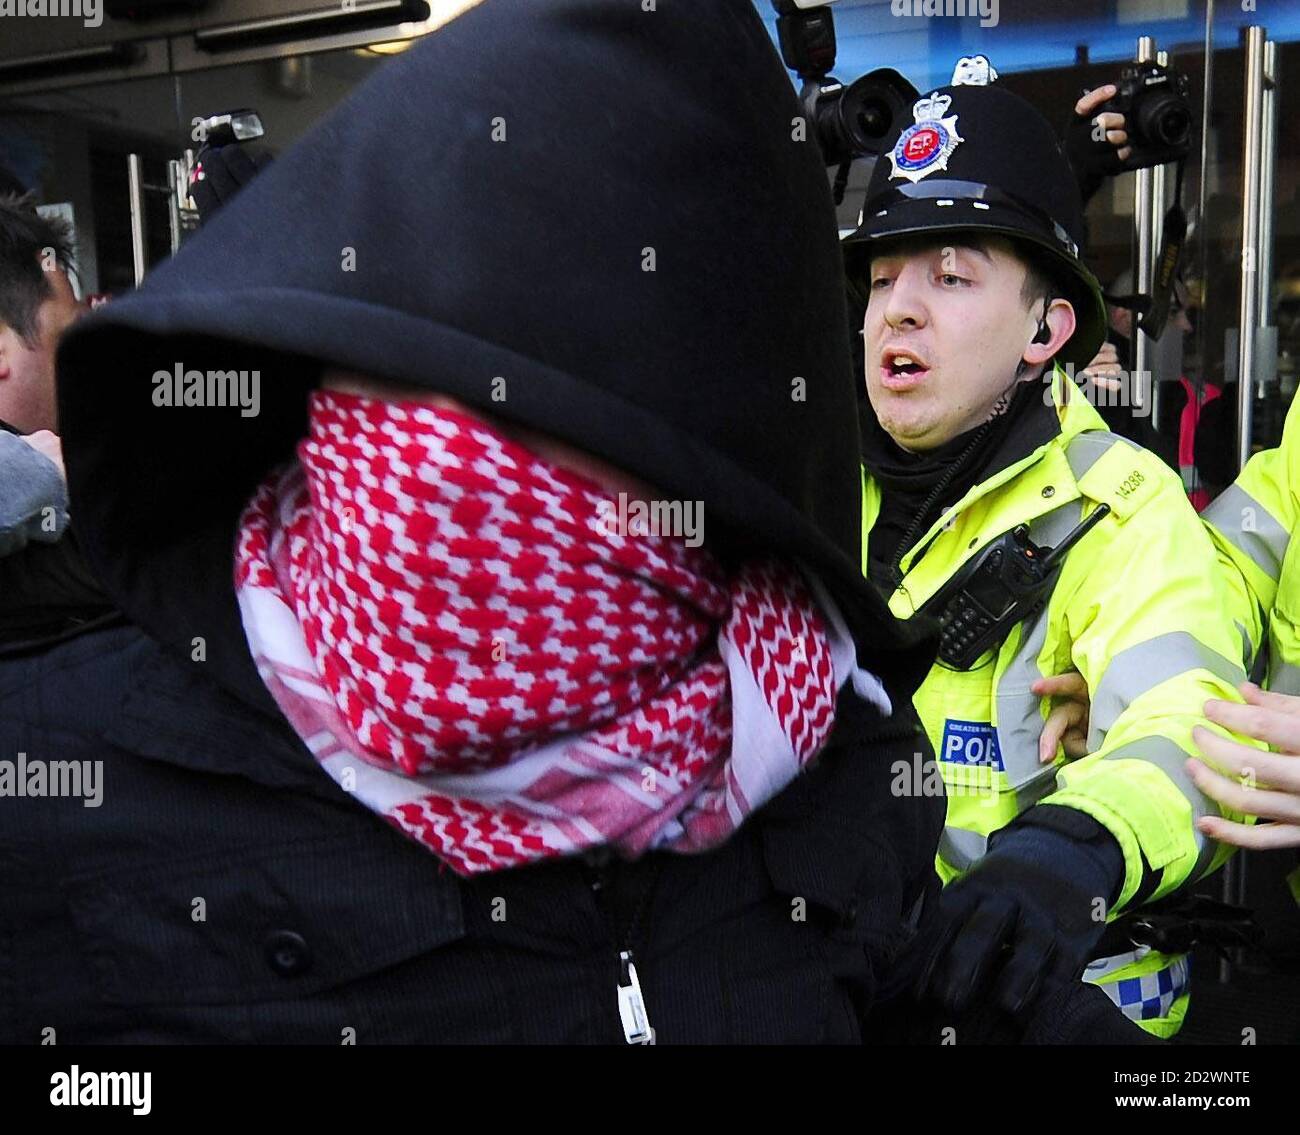 Police prevent protestors reaching the National President of the National Students Union Aaron Porter who was escorted to safety by Police after he was surrounded by protestors at the NUs demonstration in Manchester today. Stock Photo